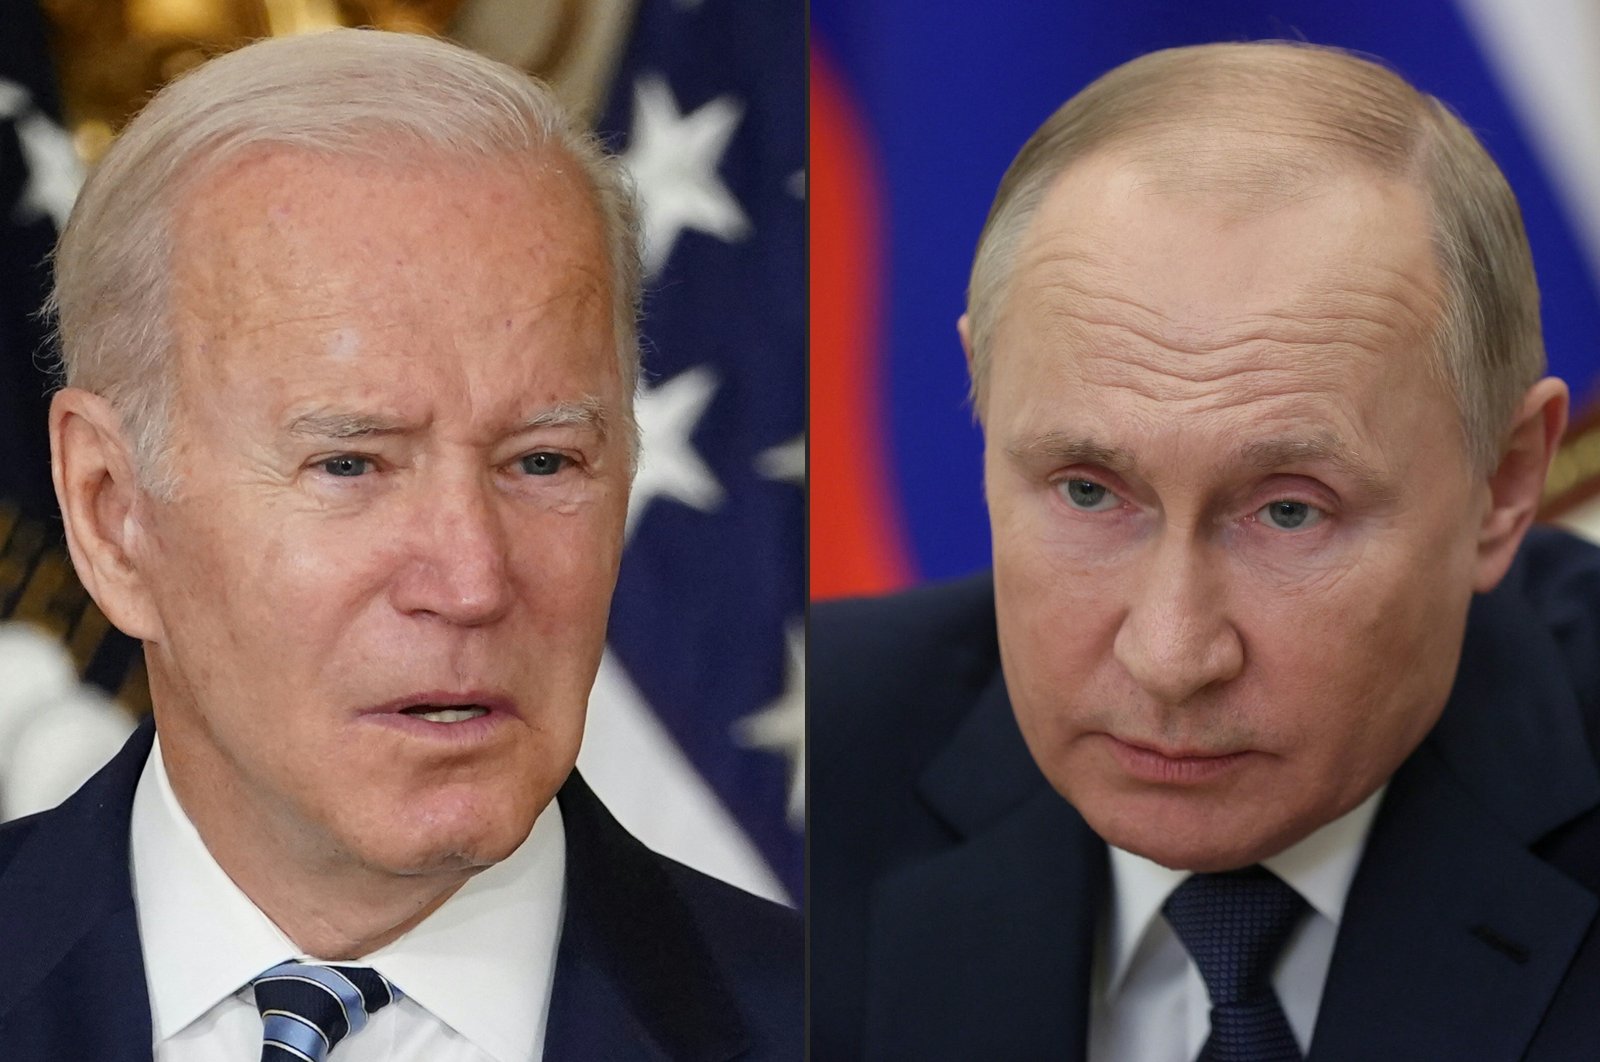 This combination of pictures created on Dec. 6, 2021, shows U.S. President Joe Biden (L) during a signing ceremony at the White House in Washington and Russian President Vladimir Putin in a congress of the United Russia party in Moscow. (AFP Photo)